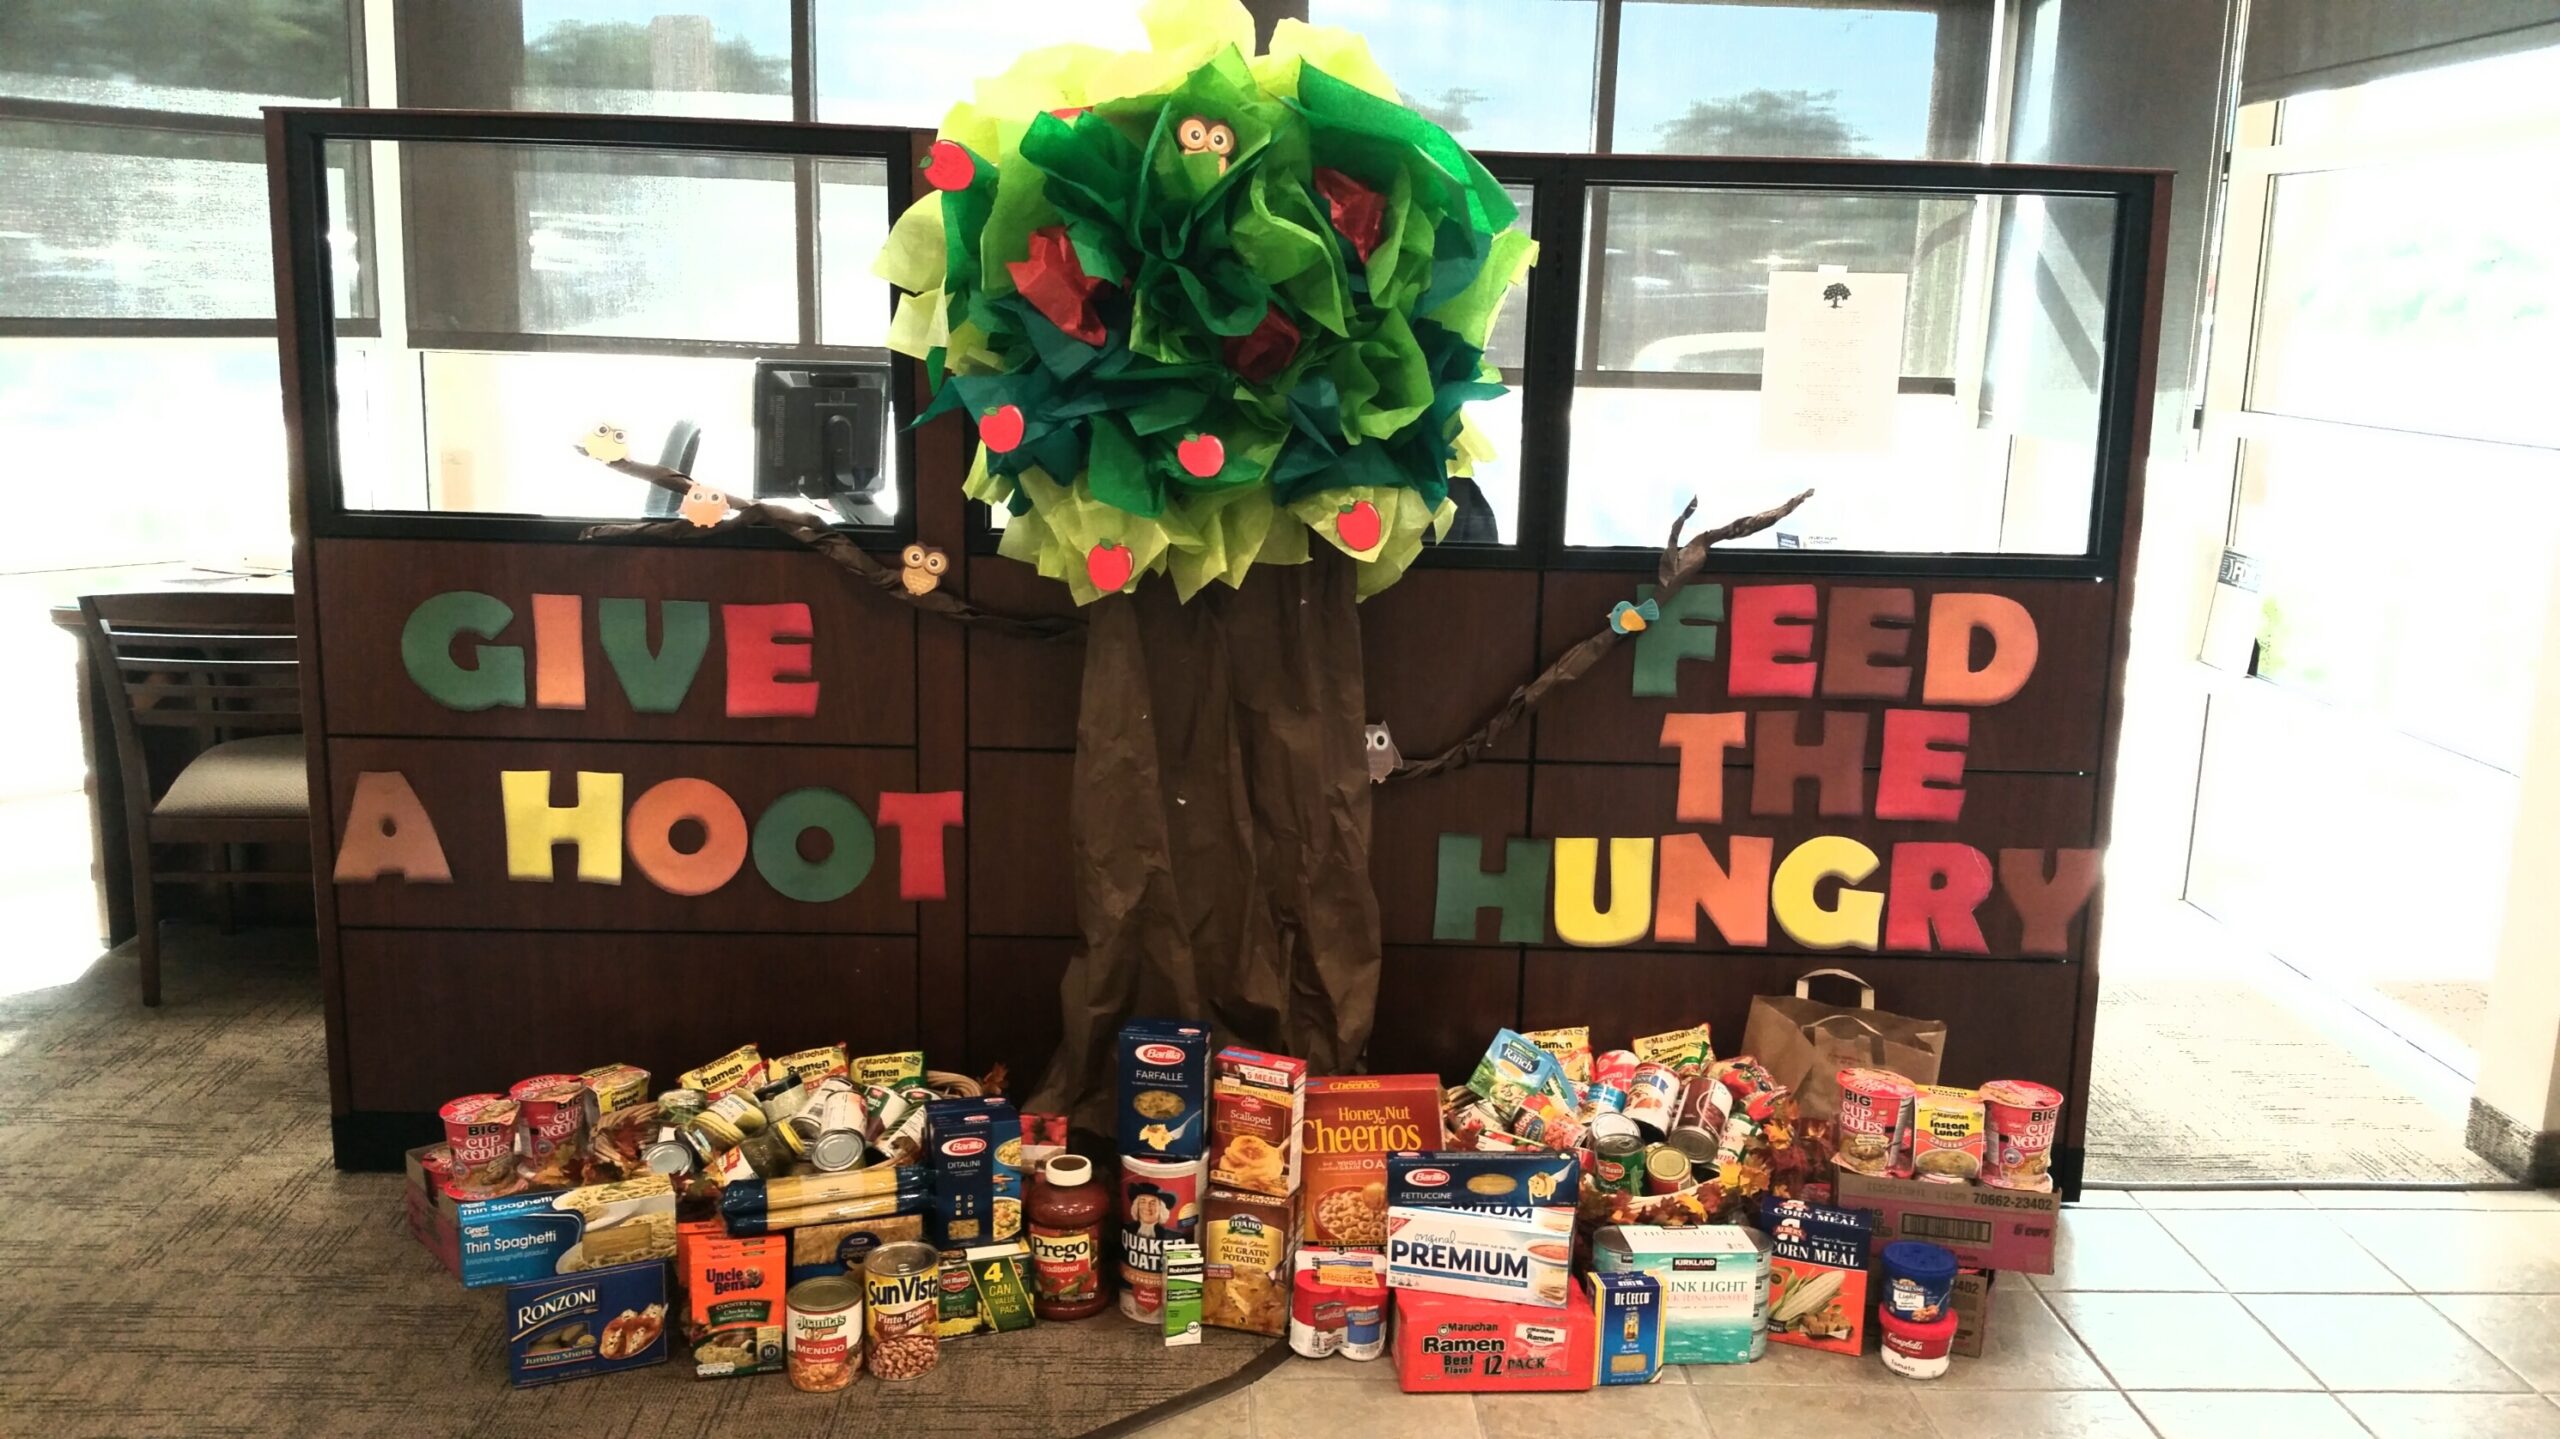 Just in time for the holidays, Nevada State Bank donated more than 5,000 non-perishable food items, or 11.5 barrels, to the Las Vegas Rescue Mission